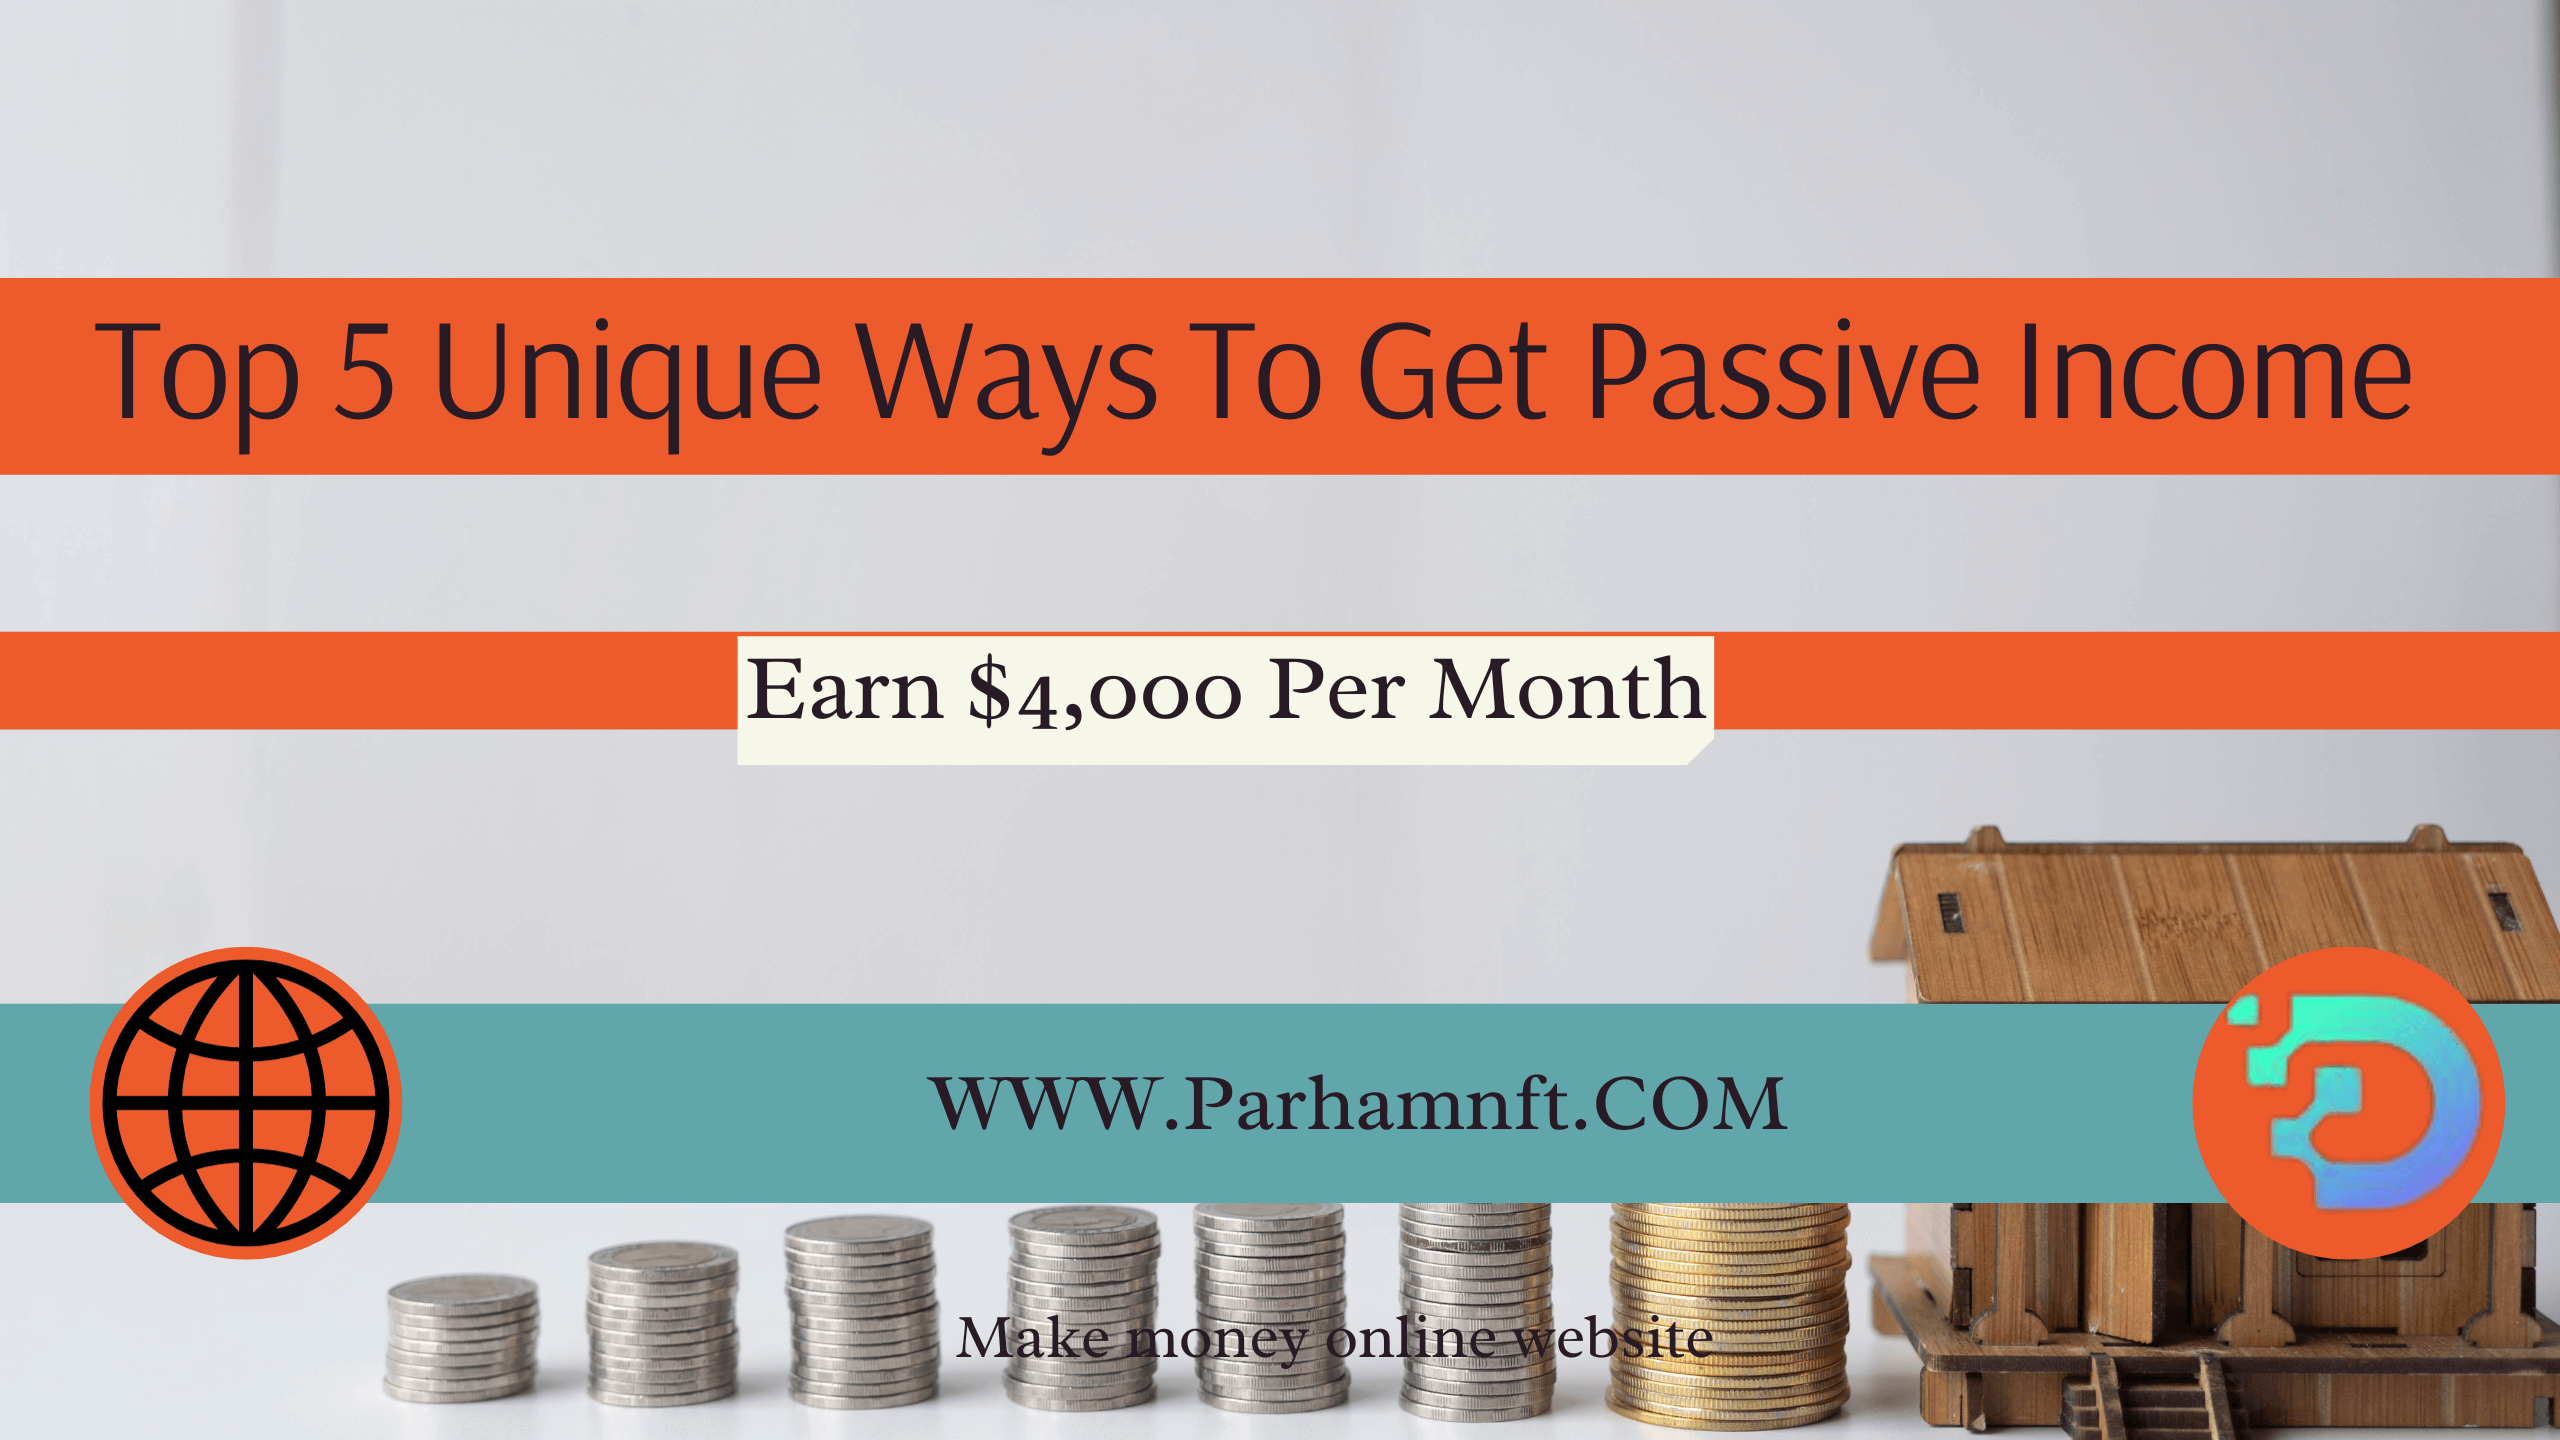 Top 5 Unique Ways To Get Passive Income — Earn $4,000 Per Month